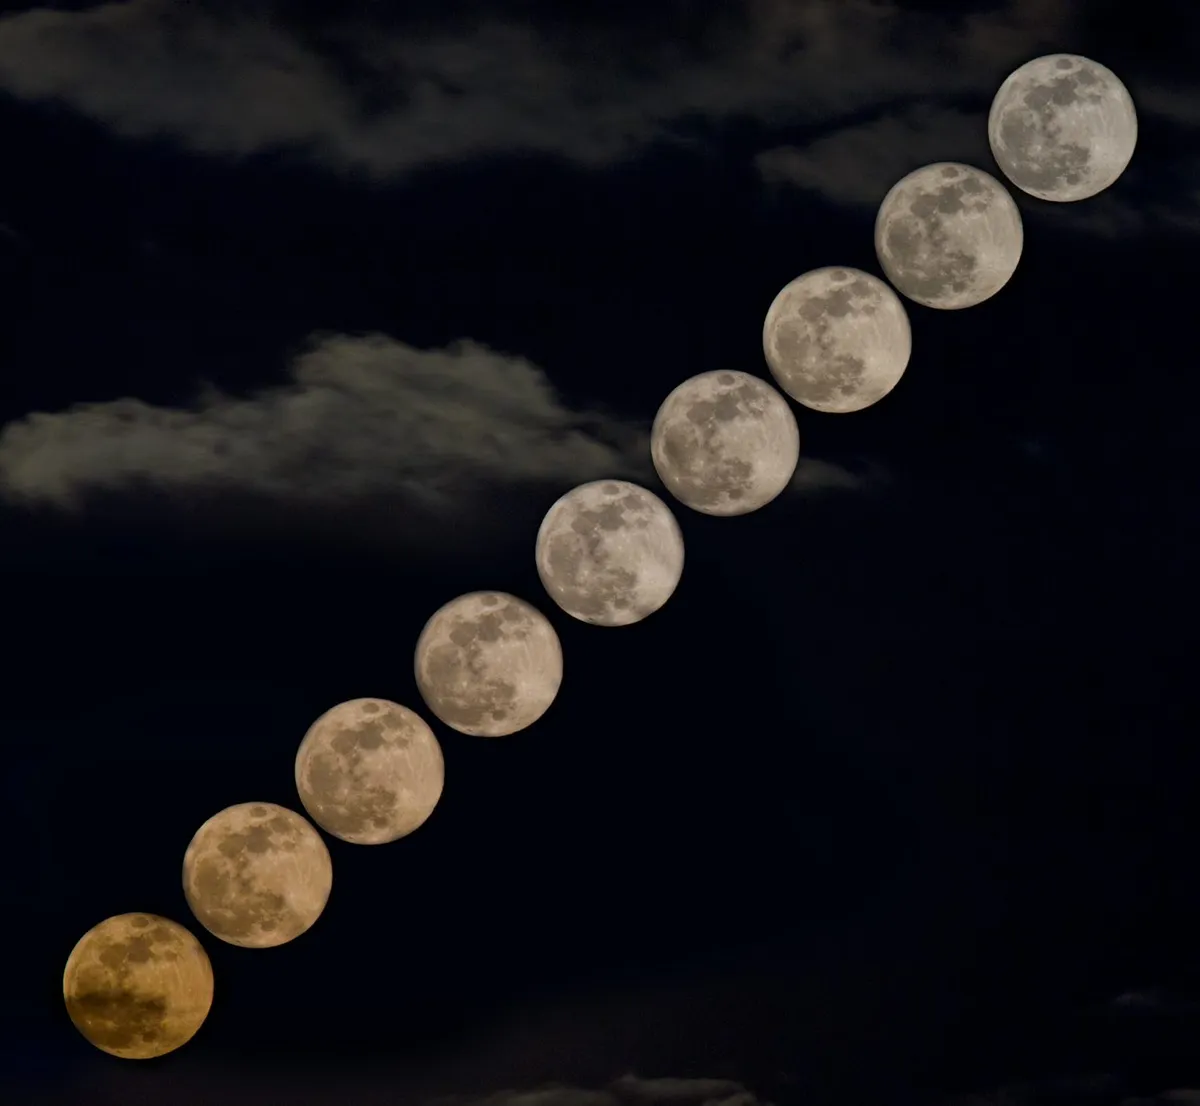 A composite image showing the rising of the Moon, by David de Cuevas, Treize Vents, France.